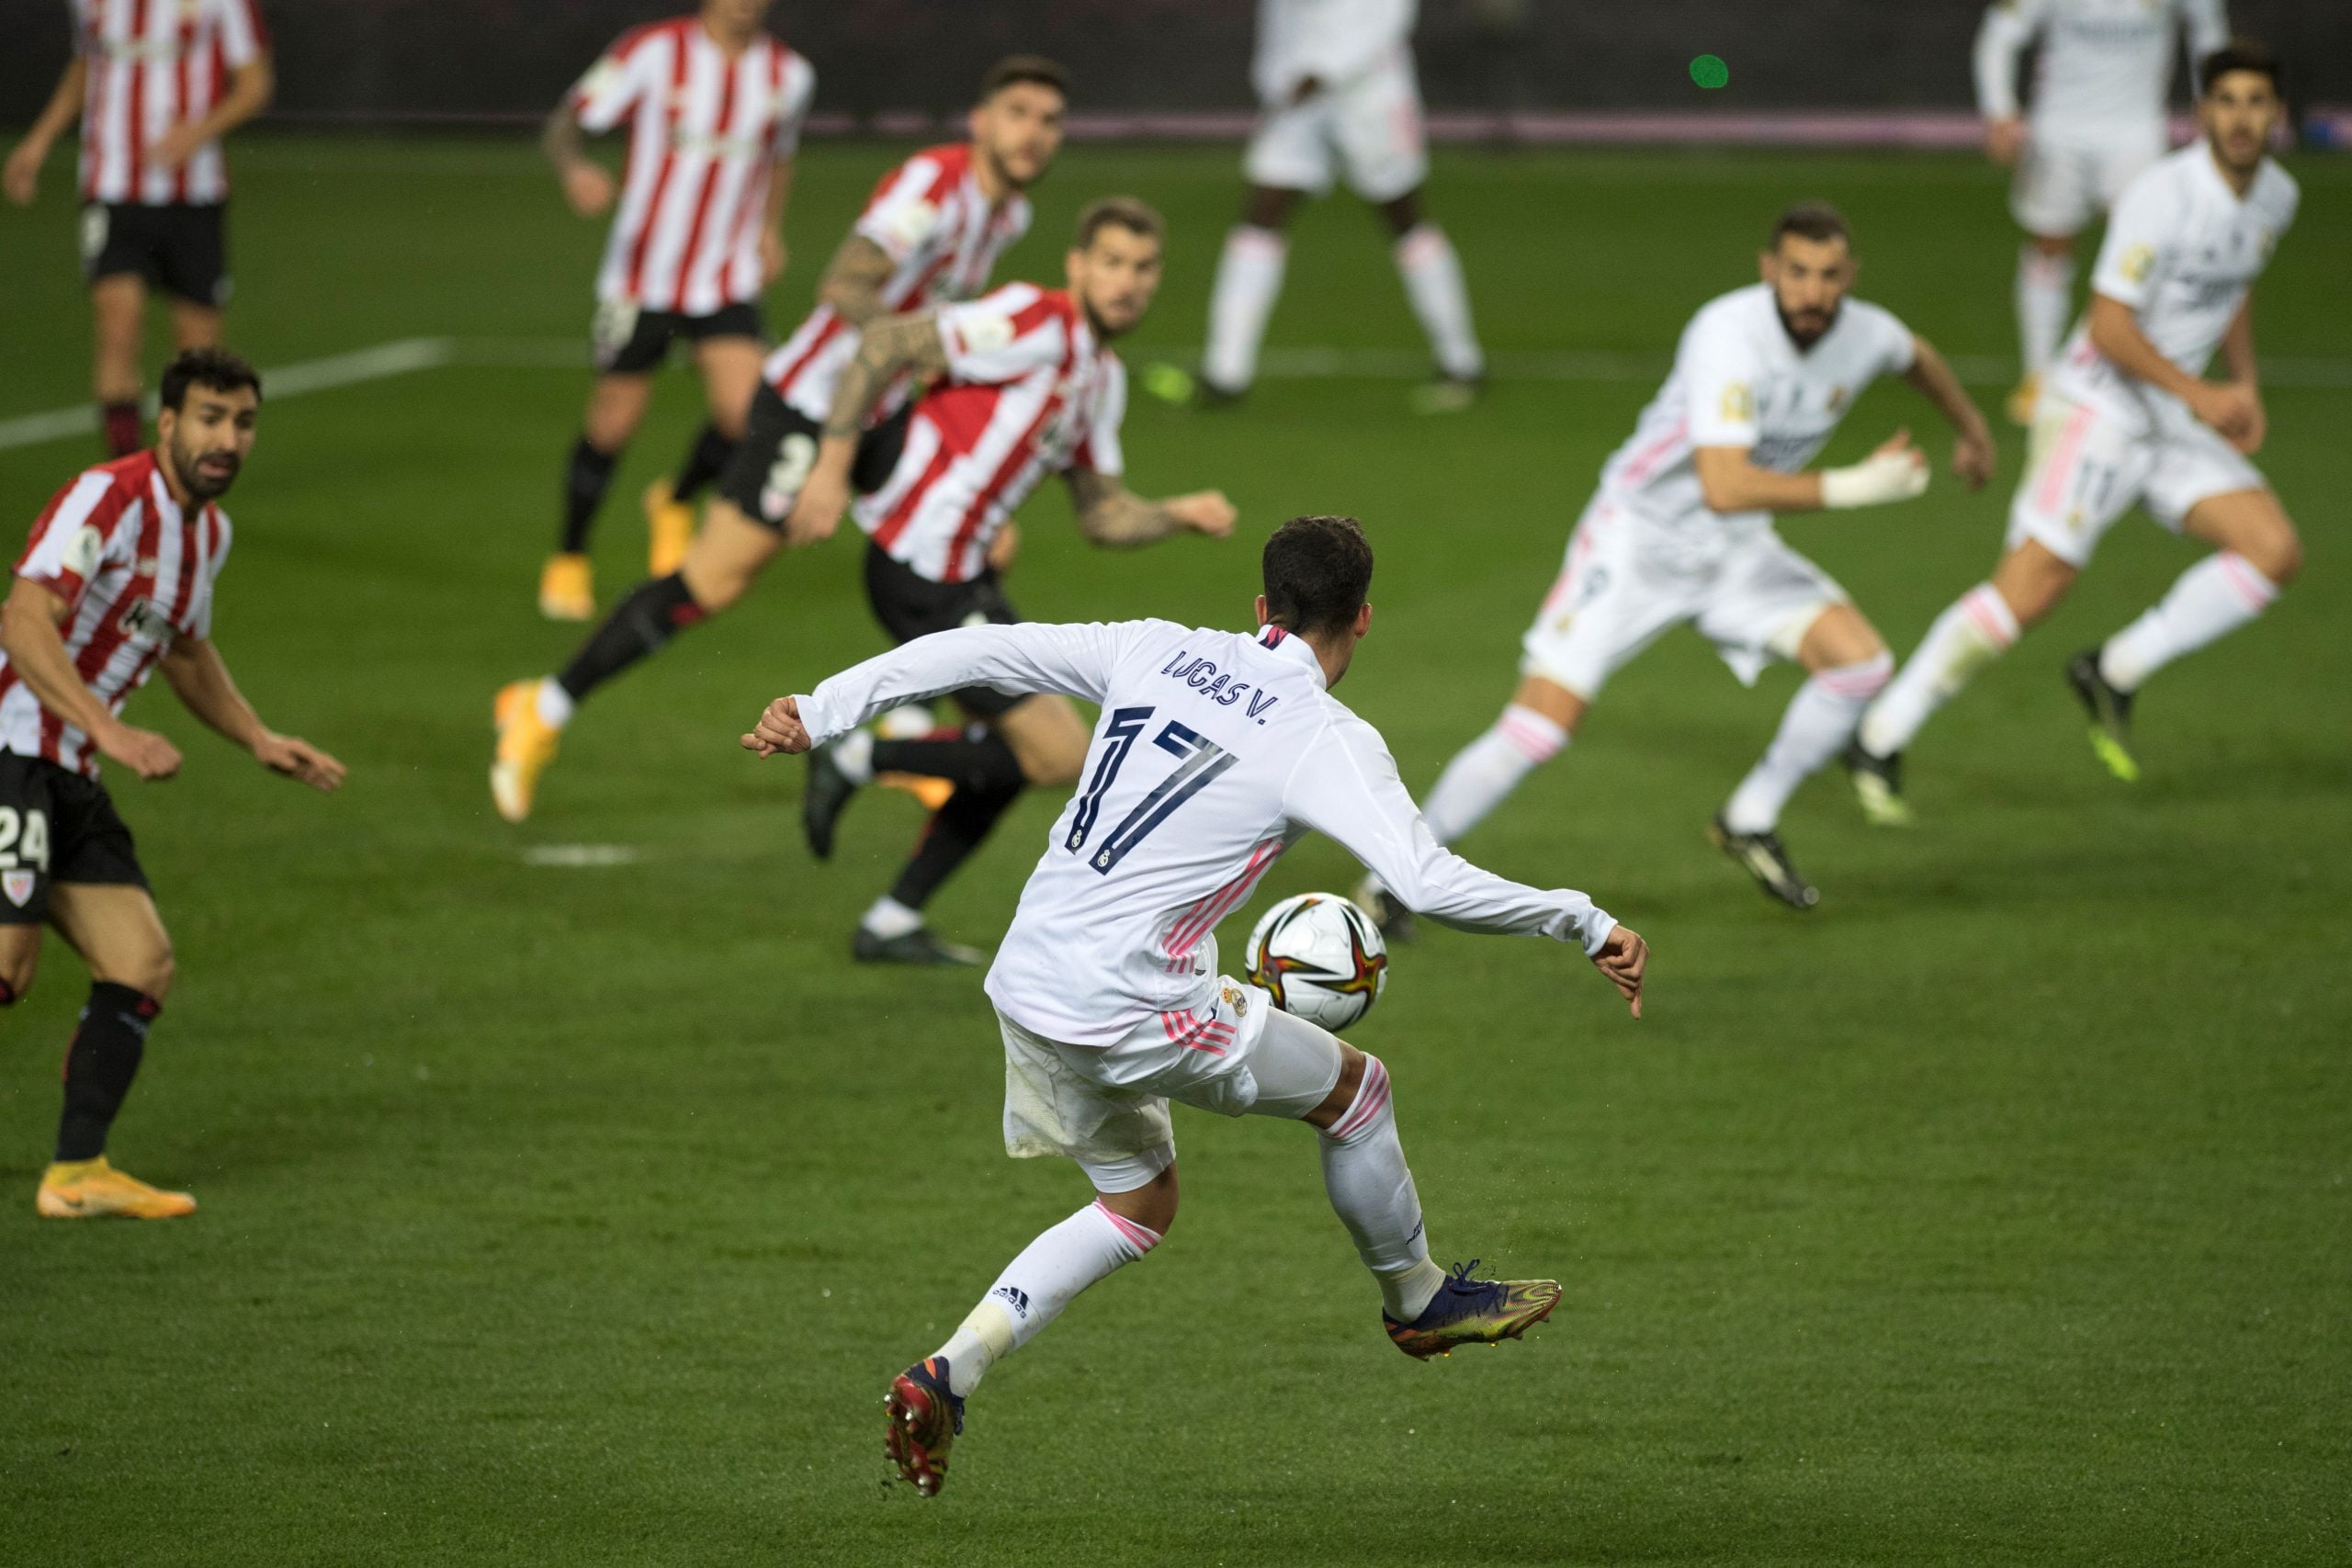 Real Madrid's Spanish forward Lucas Vazquez controls the ball  during the Spanish Super Cup semi final football match between Real Madrid and Athletic Club Bilbao at La Rosaleda stadium in Malaga on January 14, 2021. (Photo by JORGE GUERRERO / AFP) (Photo by JORGE GUERRERO/AFP via Getty Images)